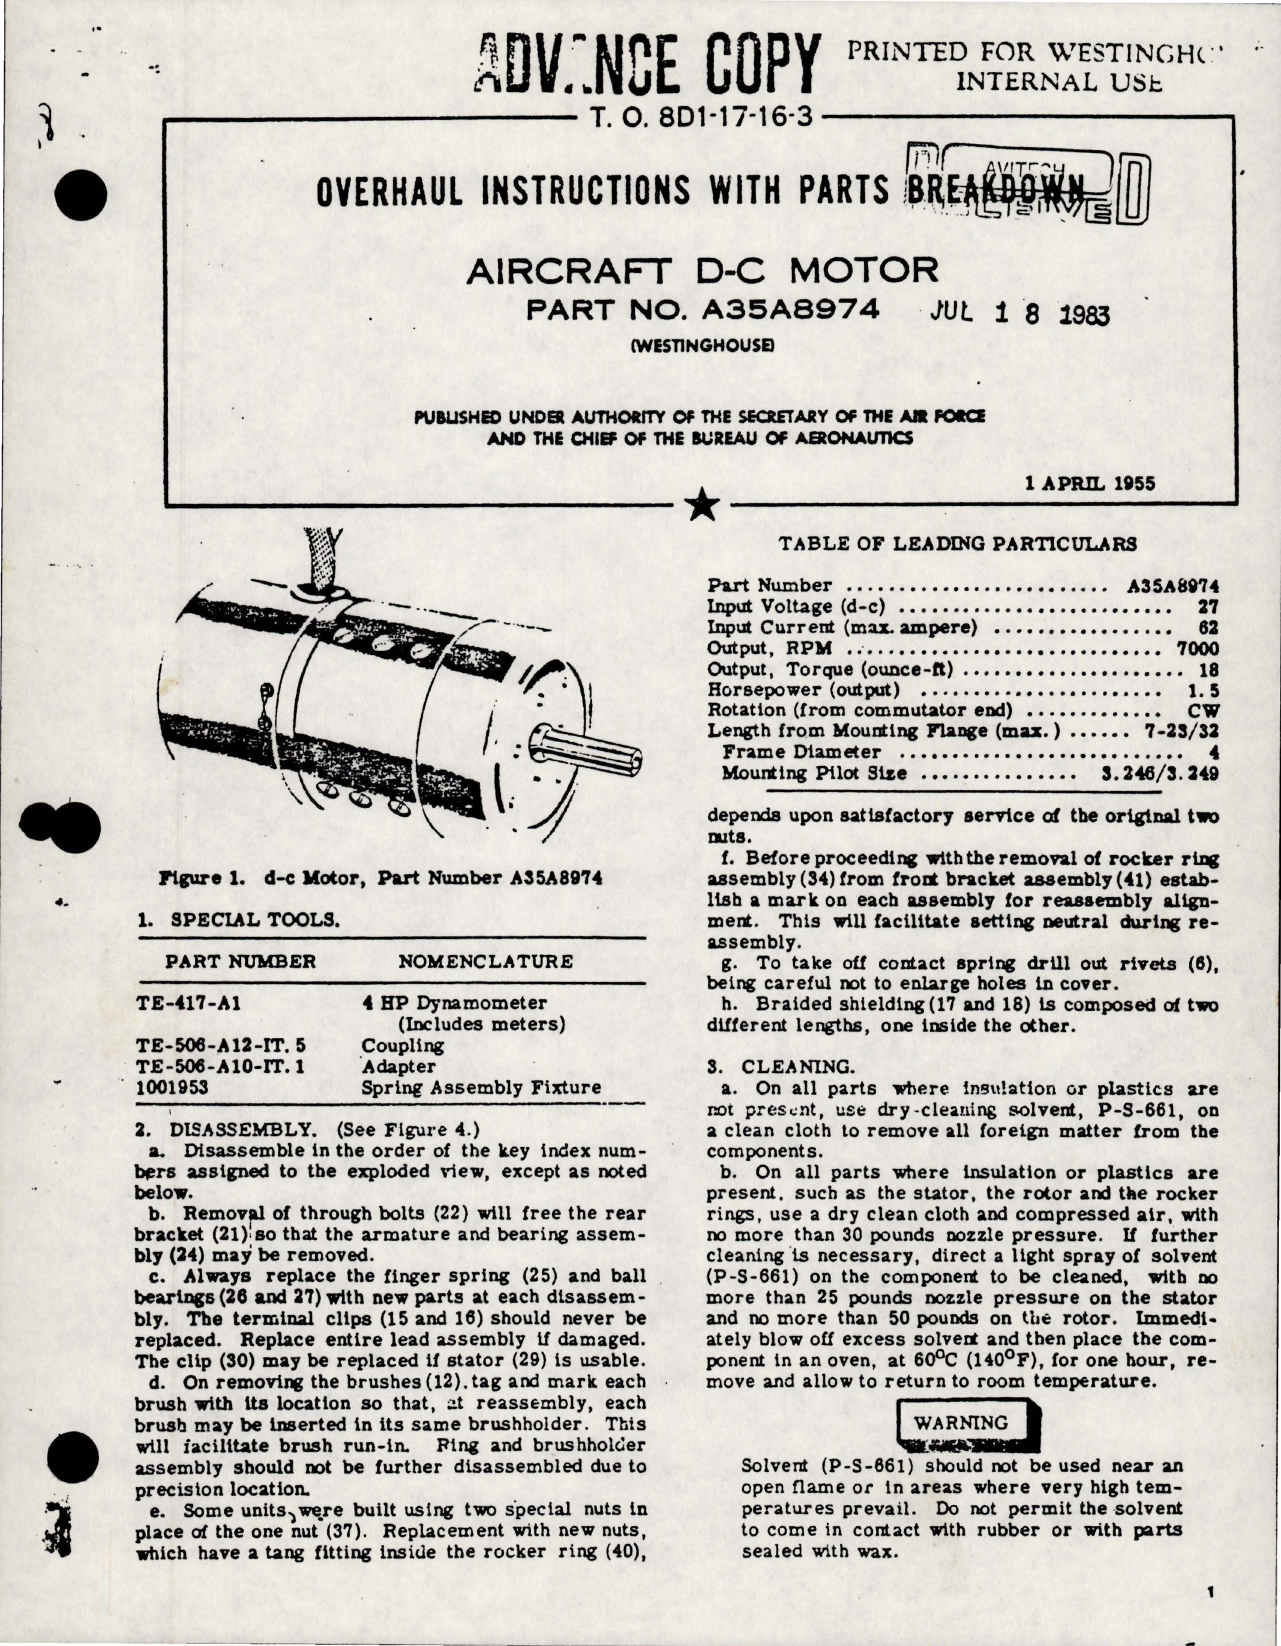 Sample page 1 from AirCorps Library document: Overhaul Instructions with Parts for DC Motor - Part A35A8974 